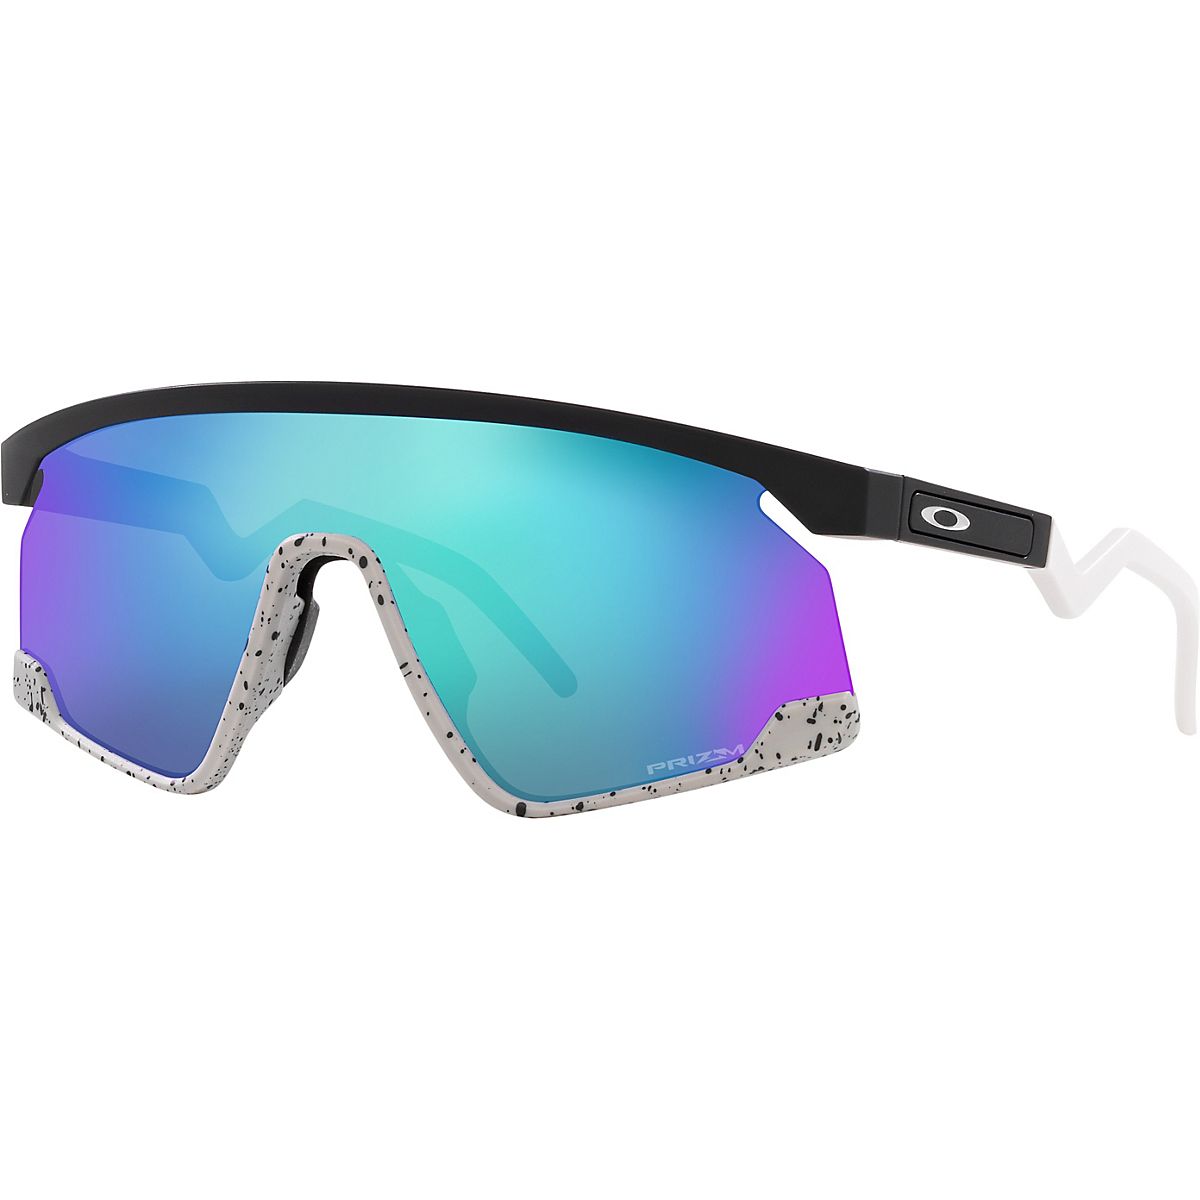 Oakley BXTR Prizm Sunglasses | Free Shipping at Academy